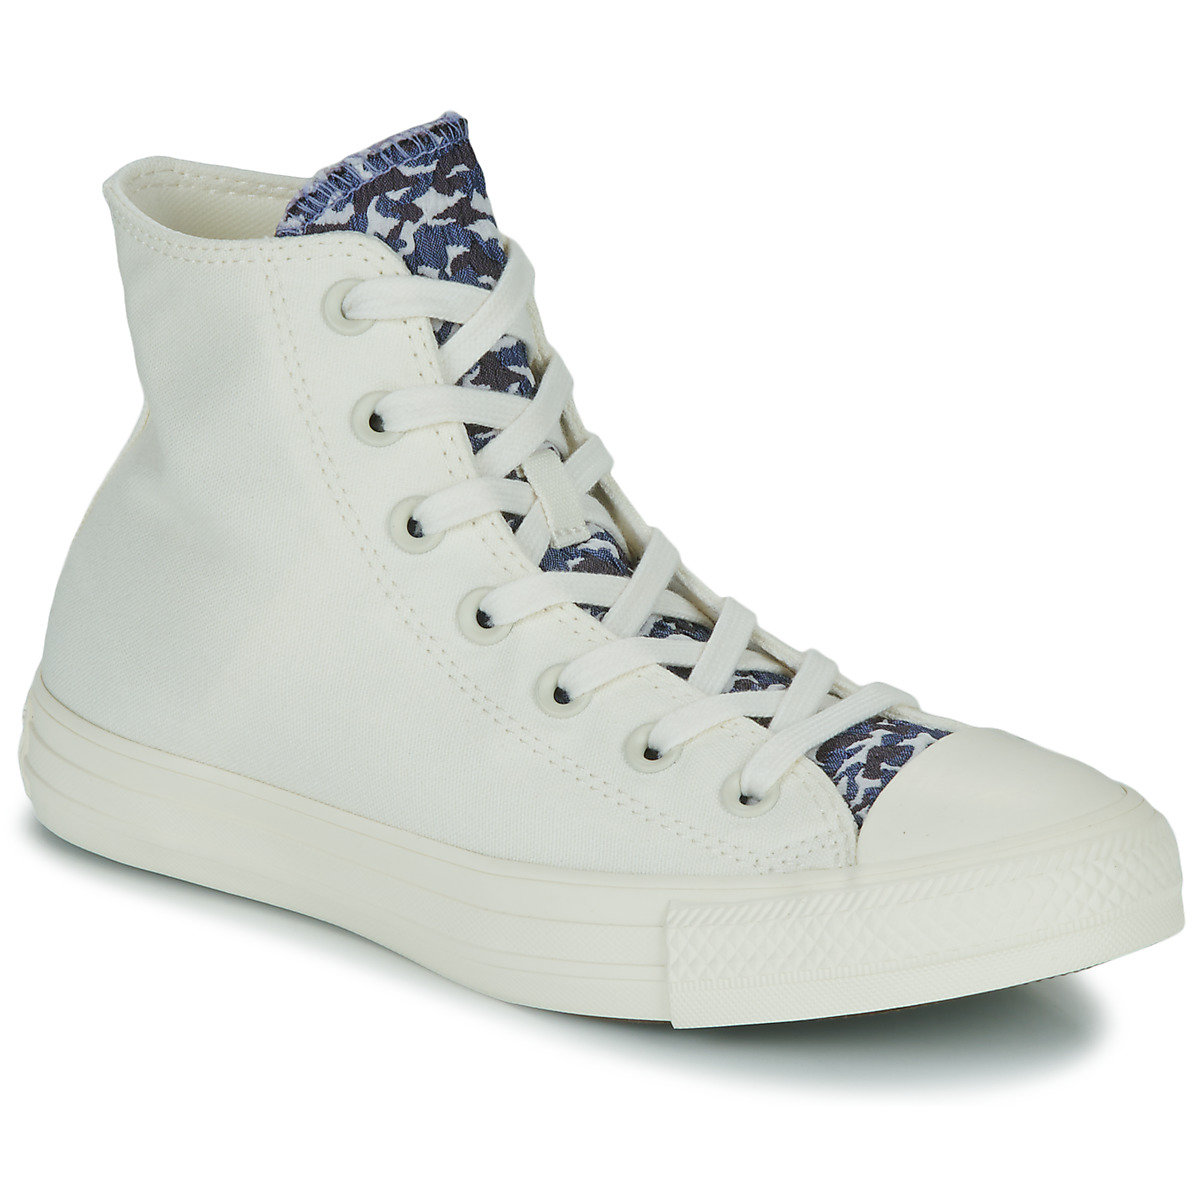 Converse Chuck Taylor All Star Desert White - delivery | Spartoo NET ! - High top trainers Women USD/$70.40